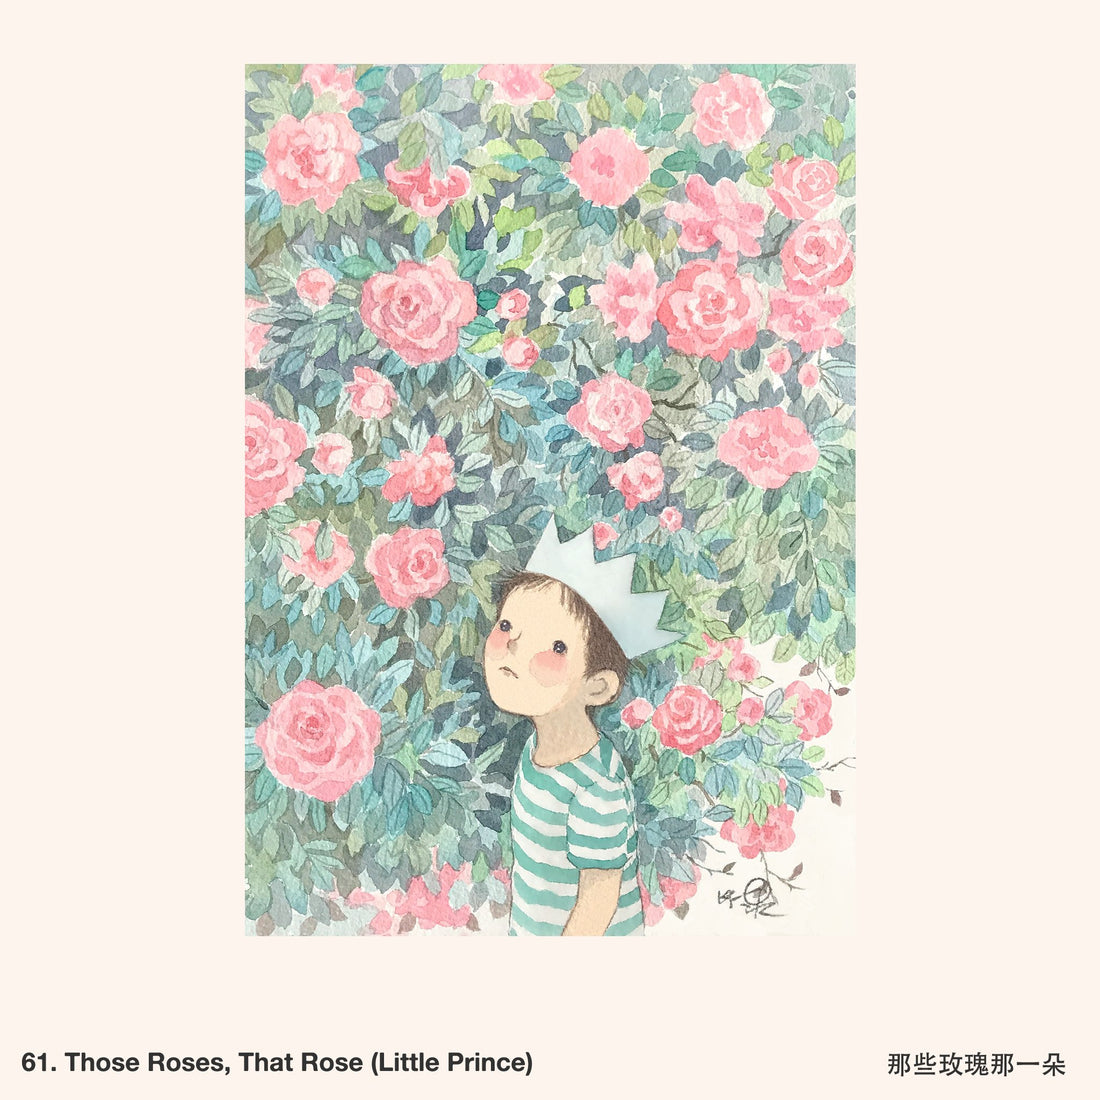 61. Those Roses That Rose (Little Prince) Artwork